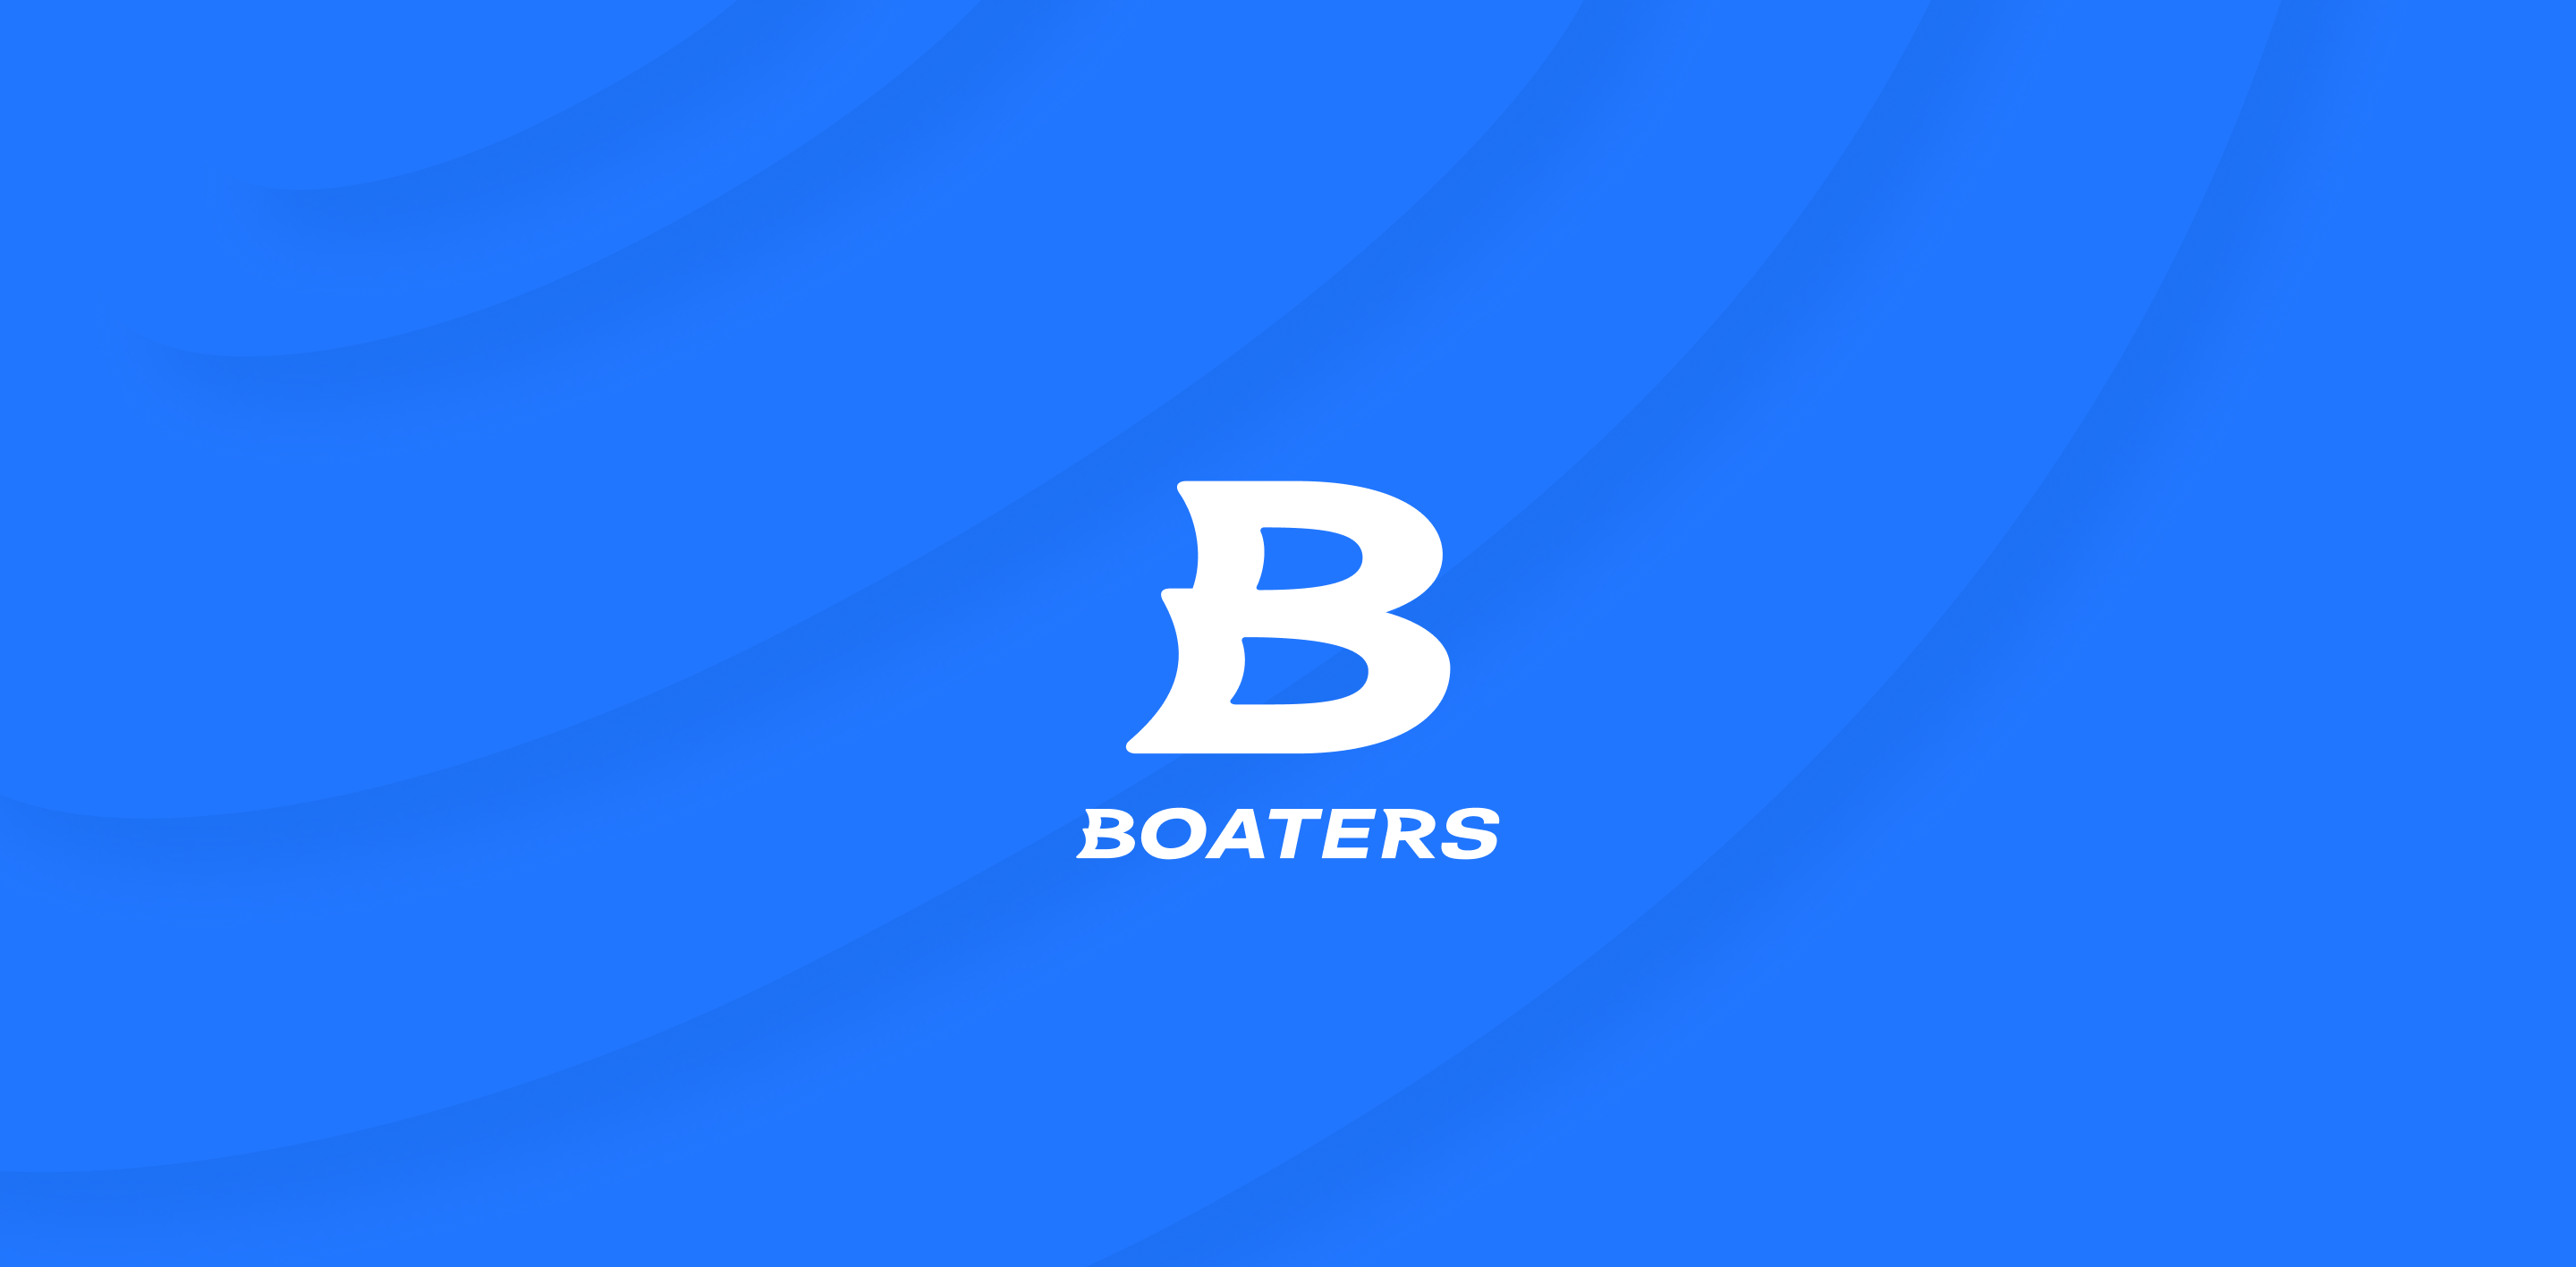 BOATERS